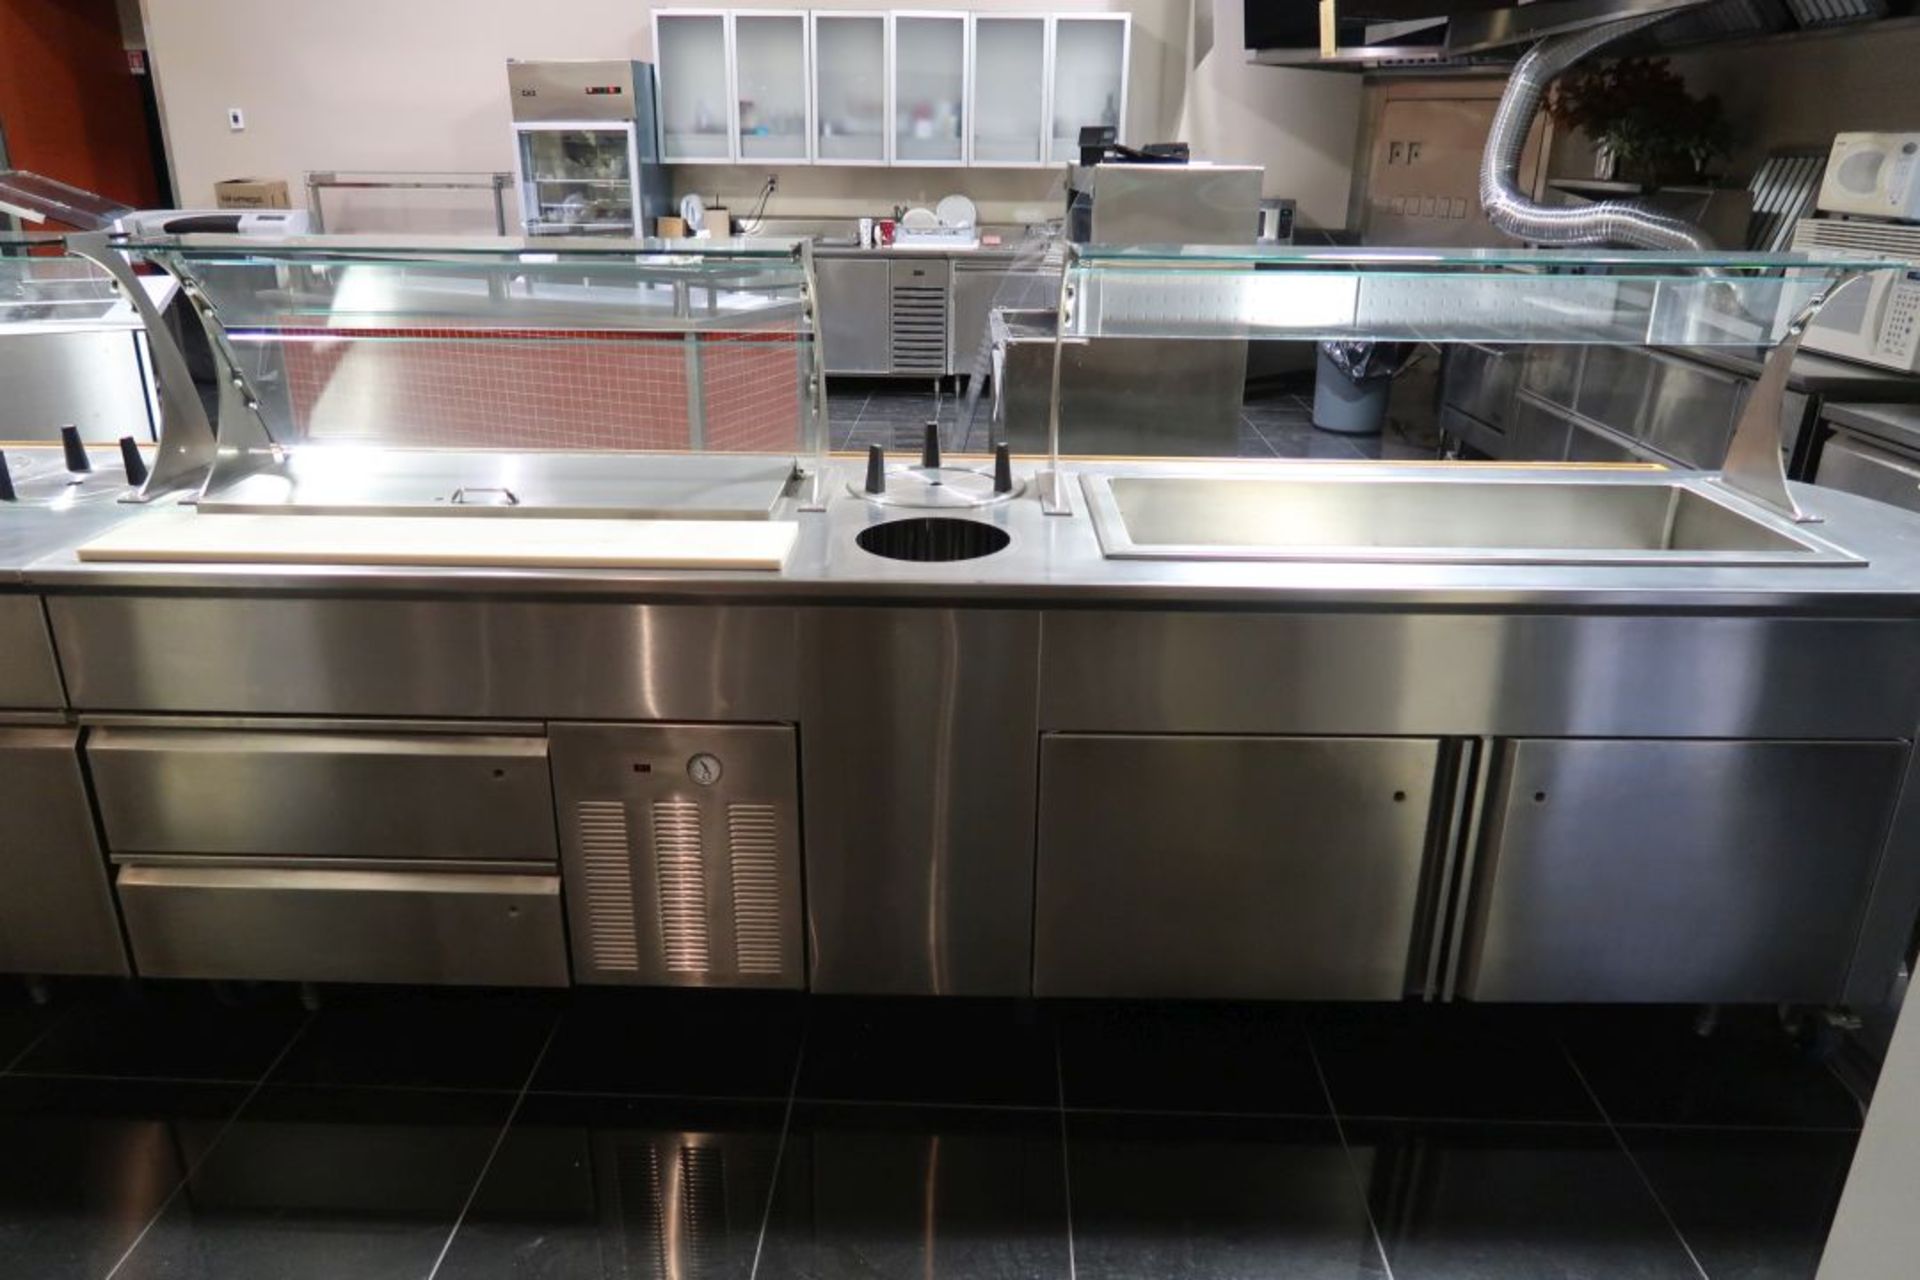 *NEW* DIAMOND 21’ HOT & COLD SERVICE COUNTER 1 COLD SECTION 2 DOORS AND WELL, 1 COLD SECTION 2 - Image 4 of 8